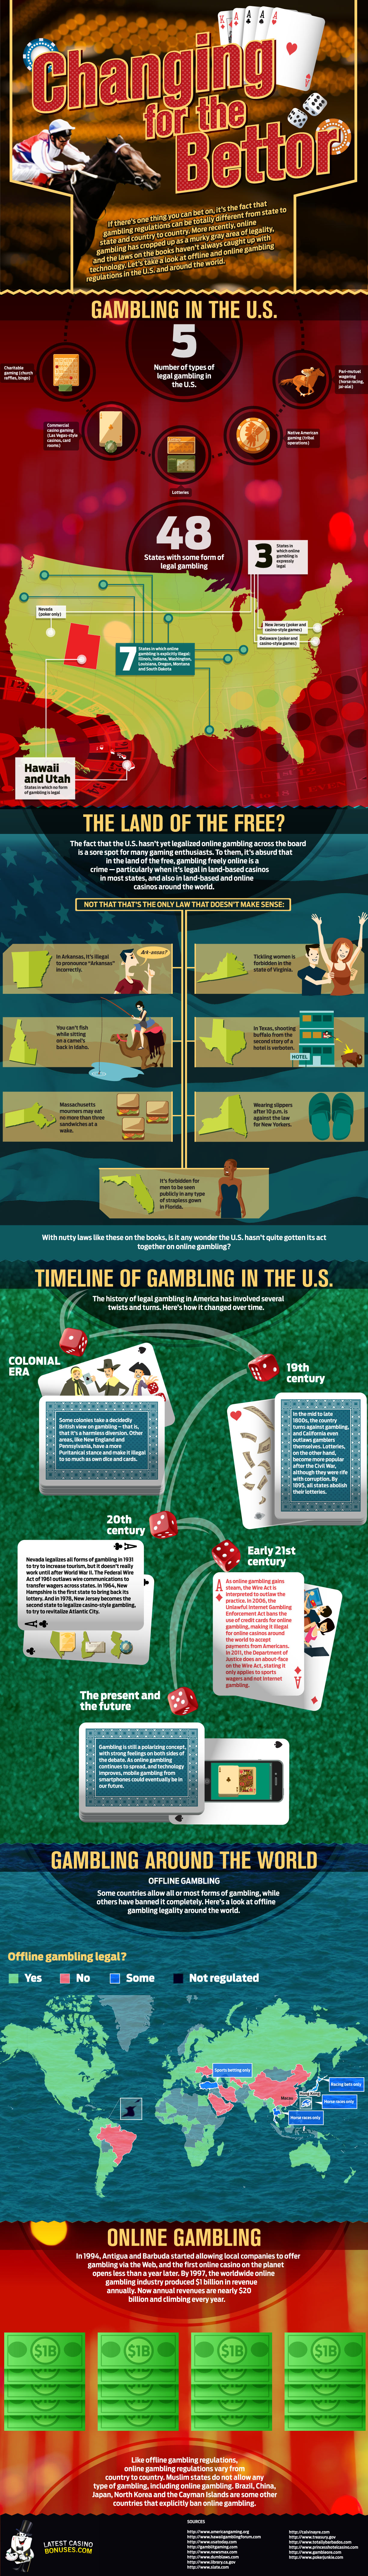 Gambling in the US infographic